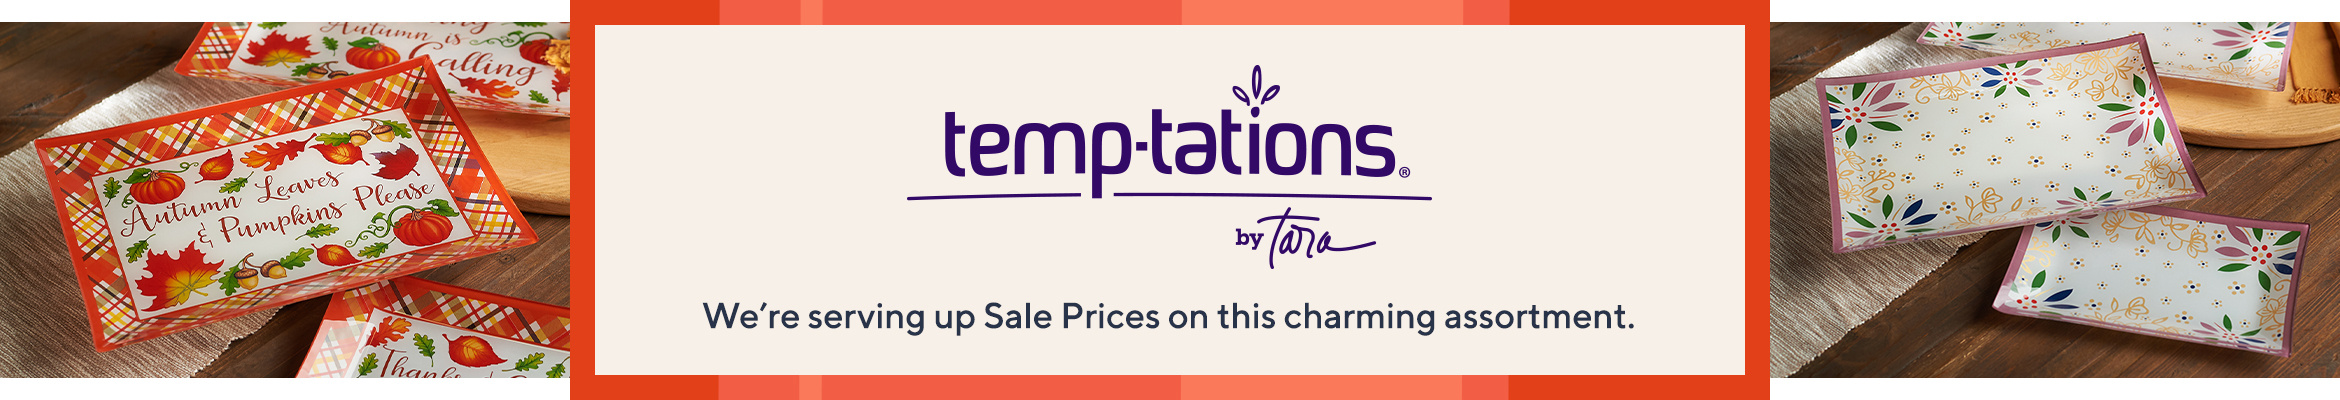 Temp-tations by Tara   We're serving up Sale Prices on this charming assortment